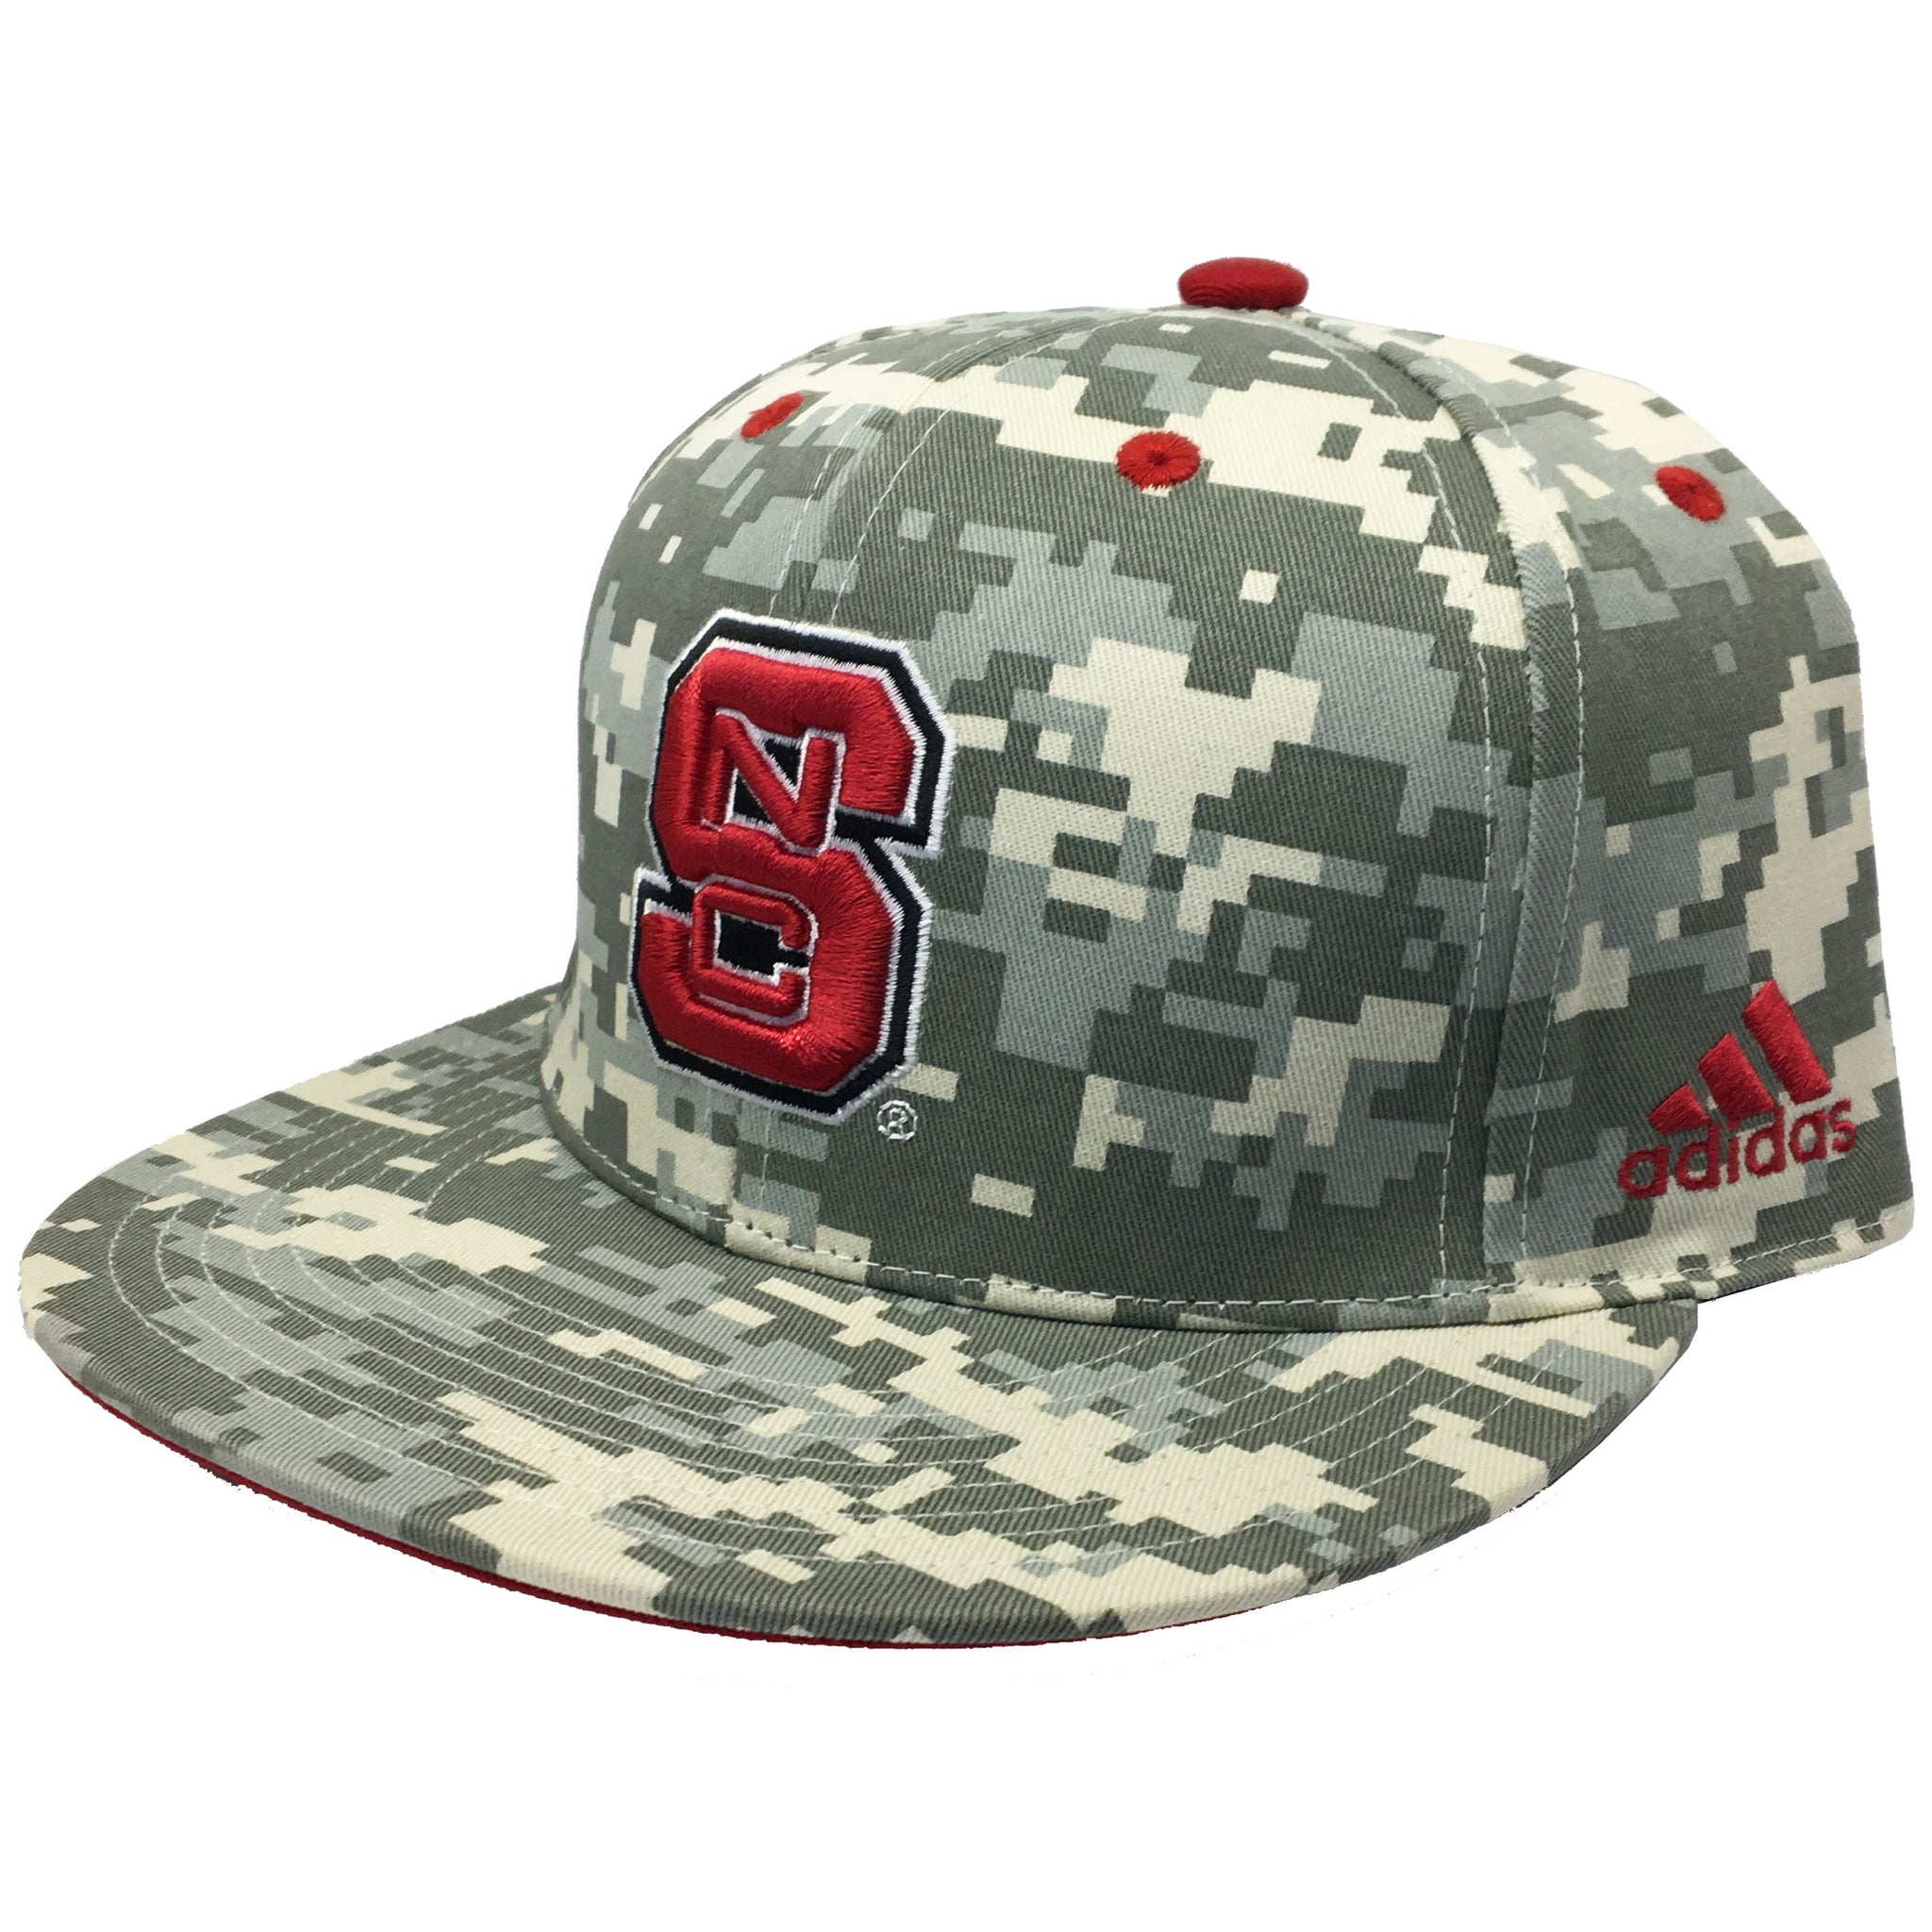 NC State Wolfpack Digital Camo Adidas® "On-Field" Baseball Performance Fitted Flatbill Hat